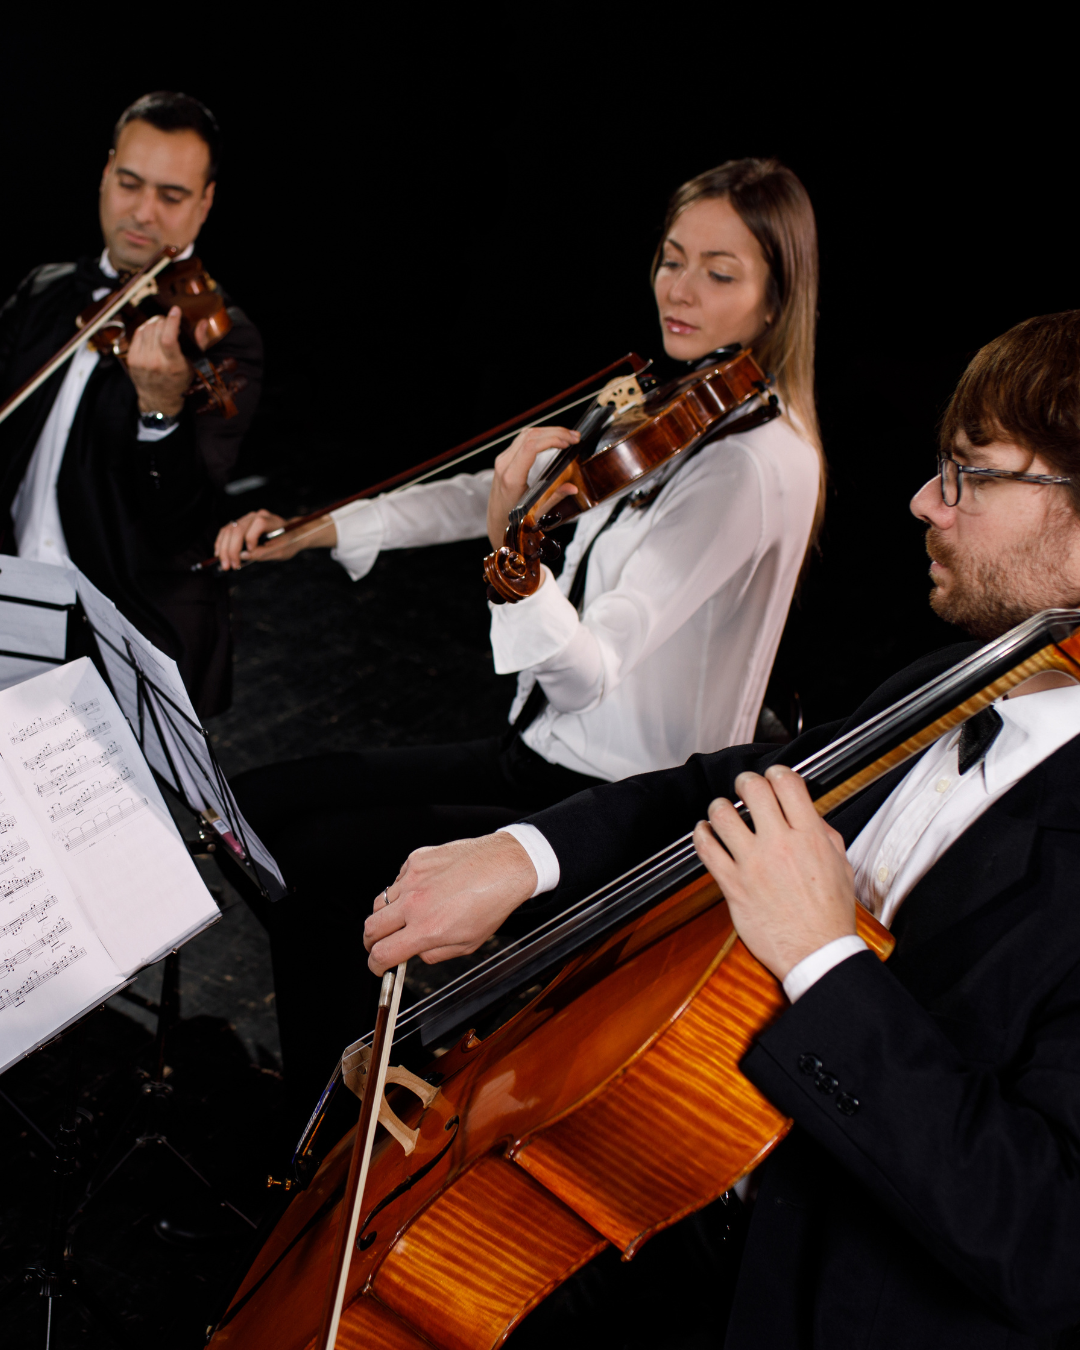 Three piece string ensemble performs at a live event